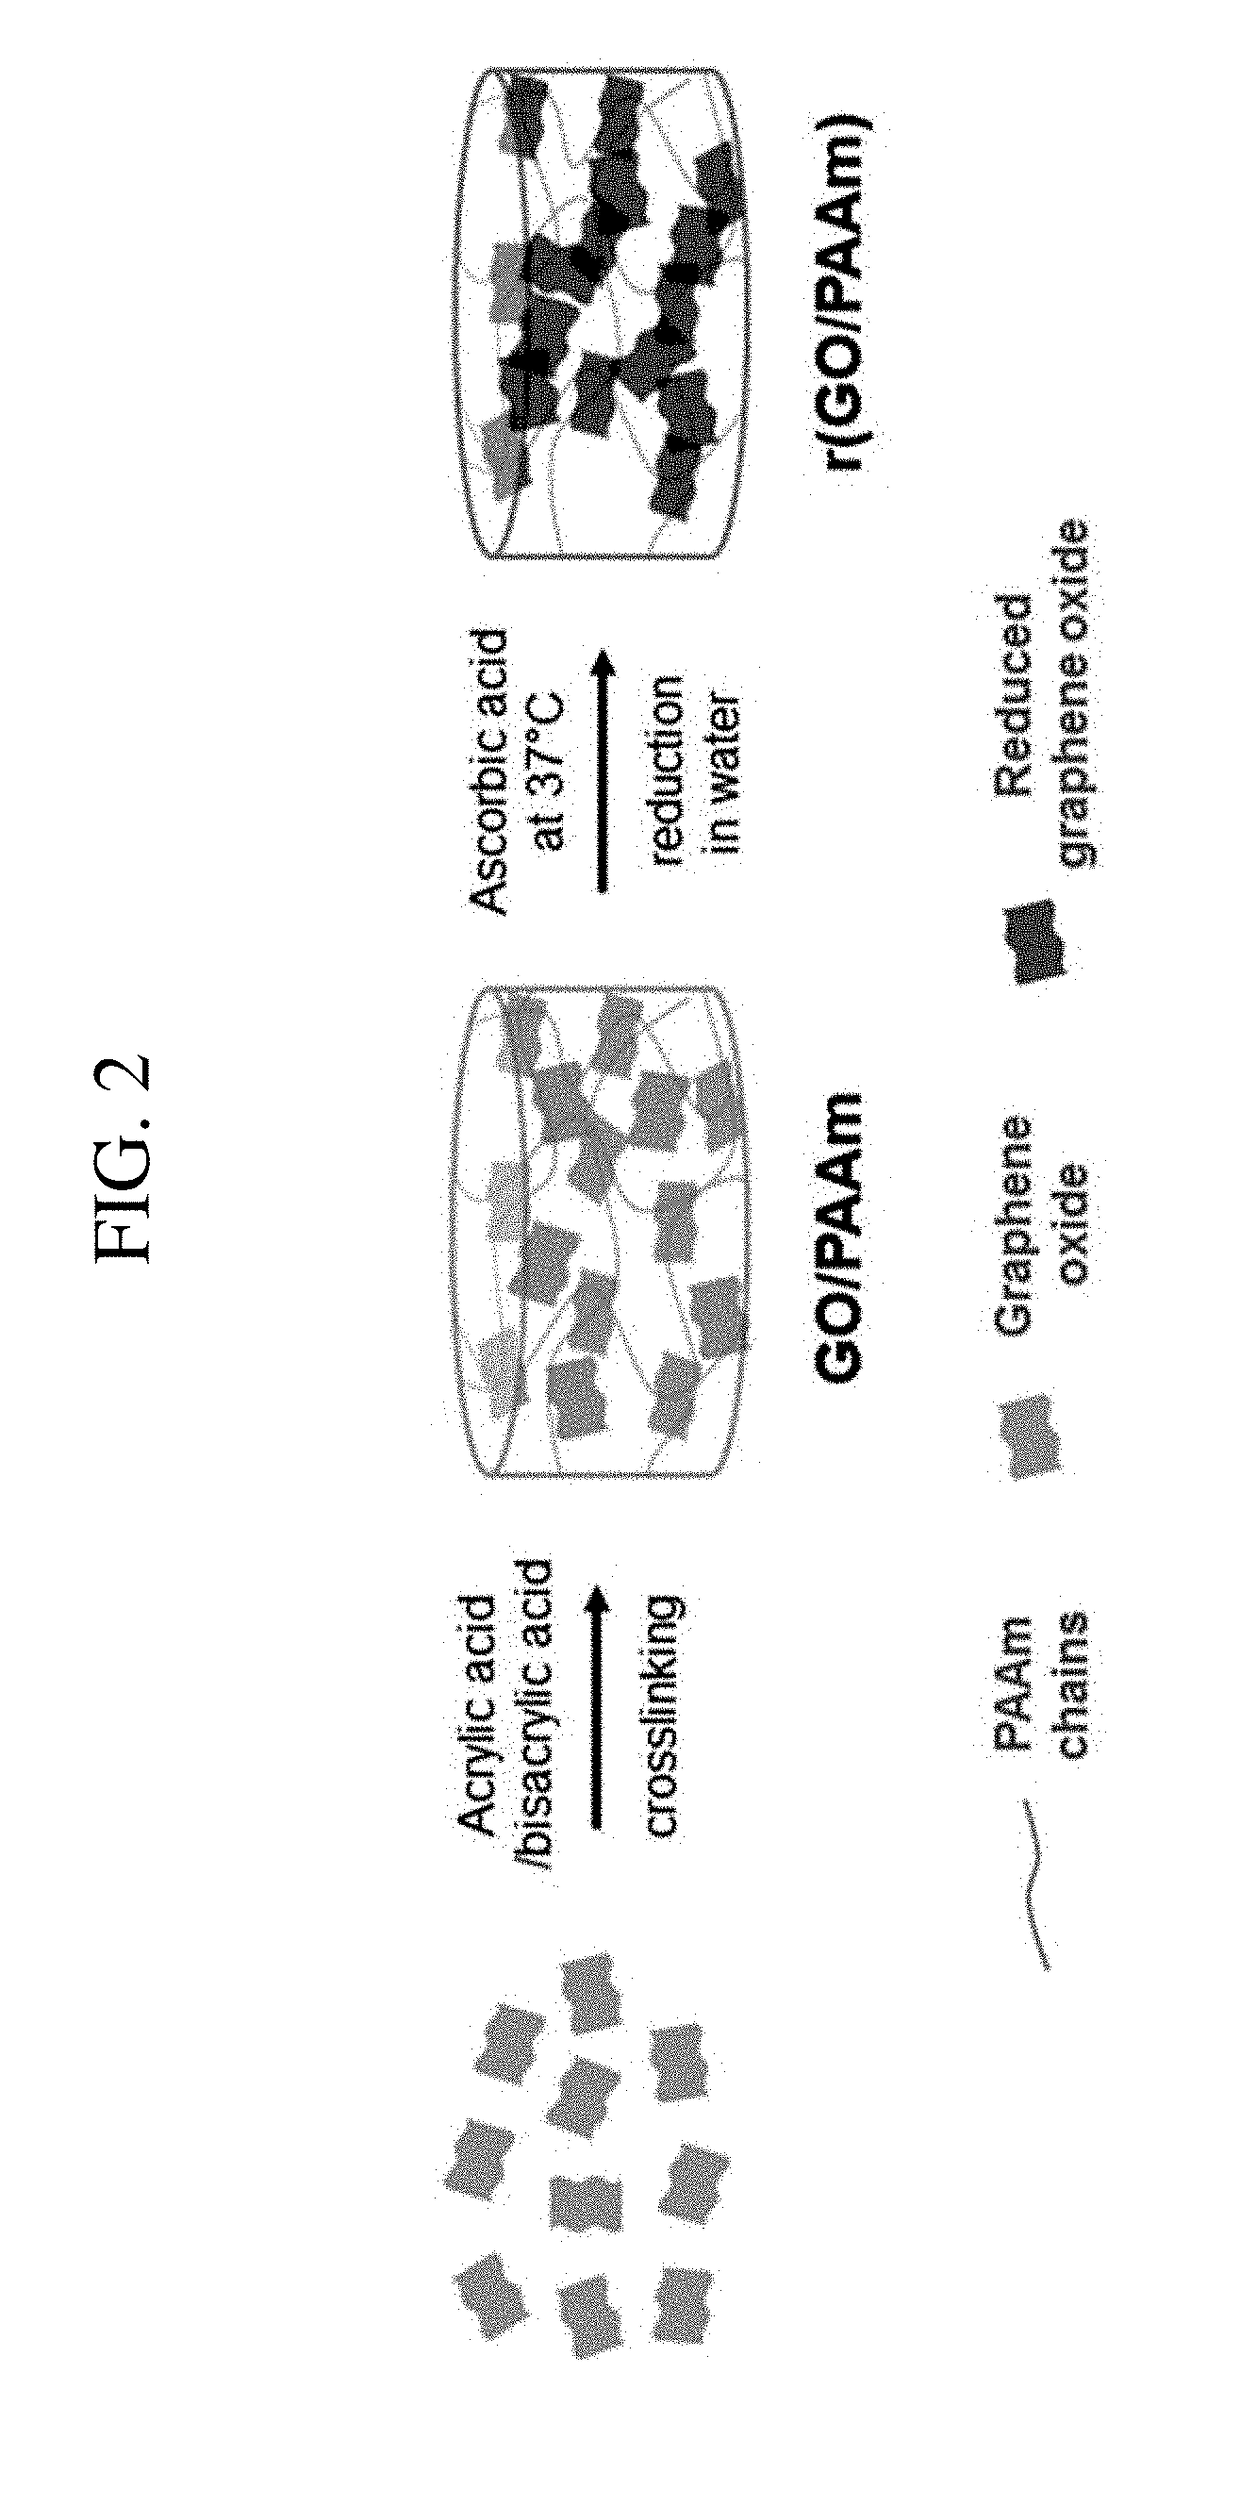 Method for preparing hydrogel containing reduced graphene oxide